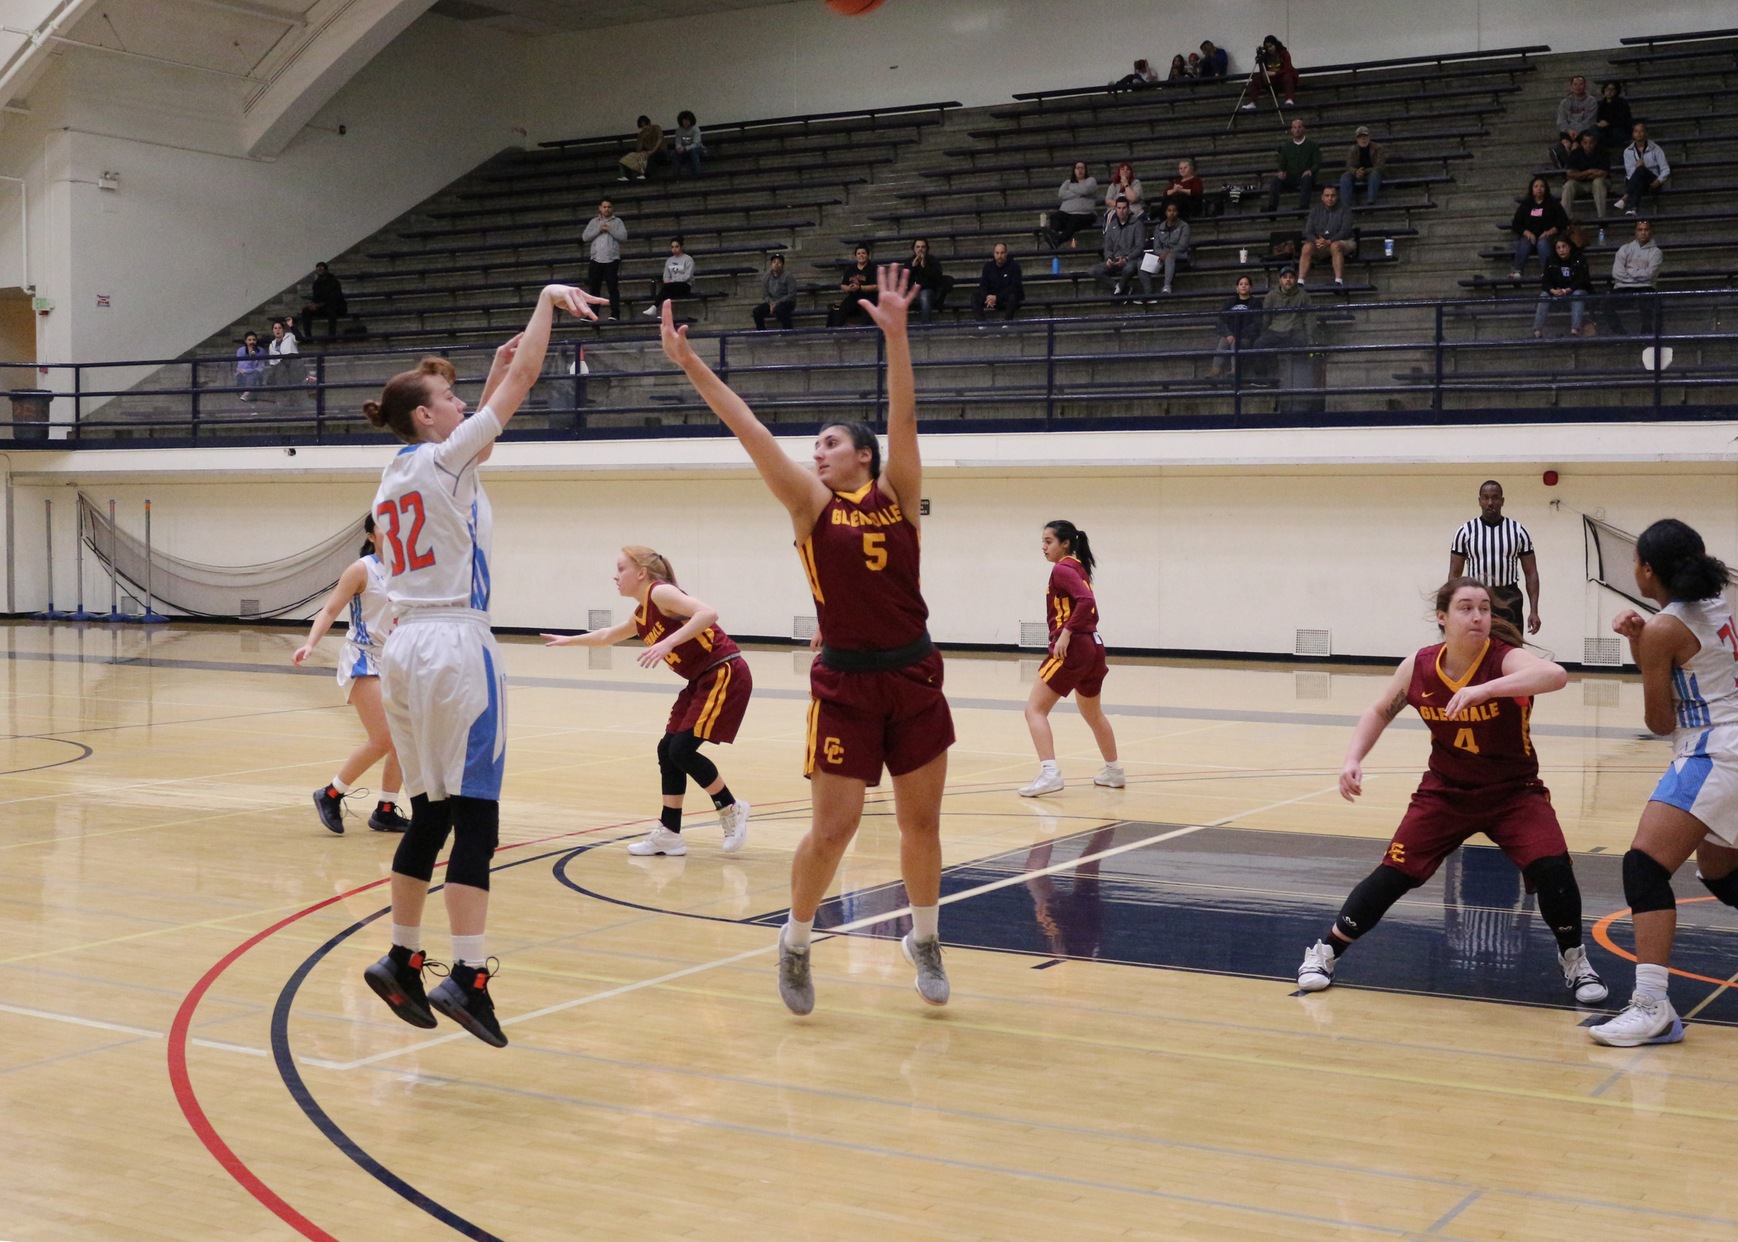 Keely Wall shows perfect form in this long range 2. The shot hit nothing but net. Image: Treyvon Watts-Hale